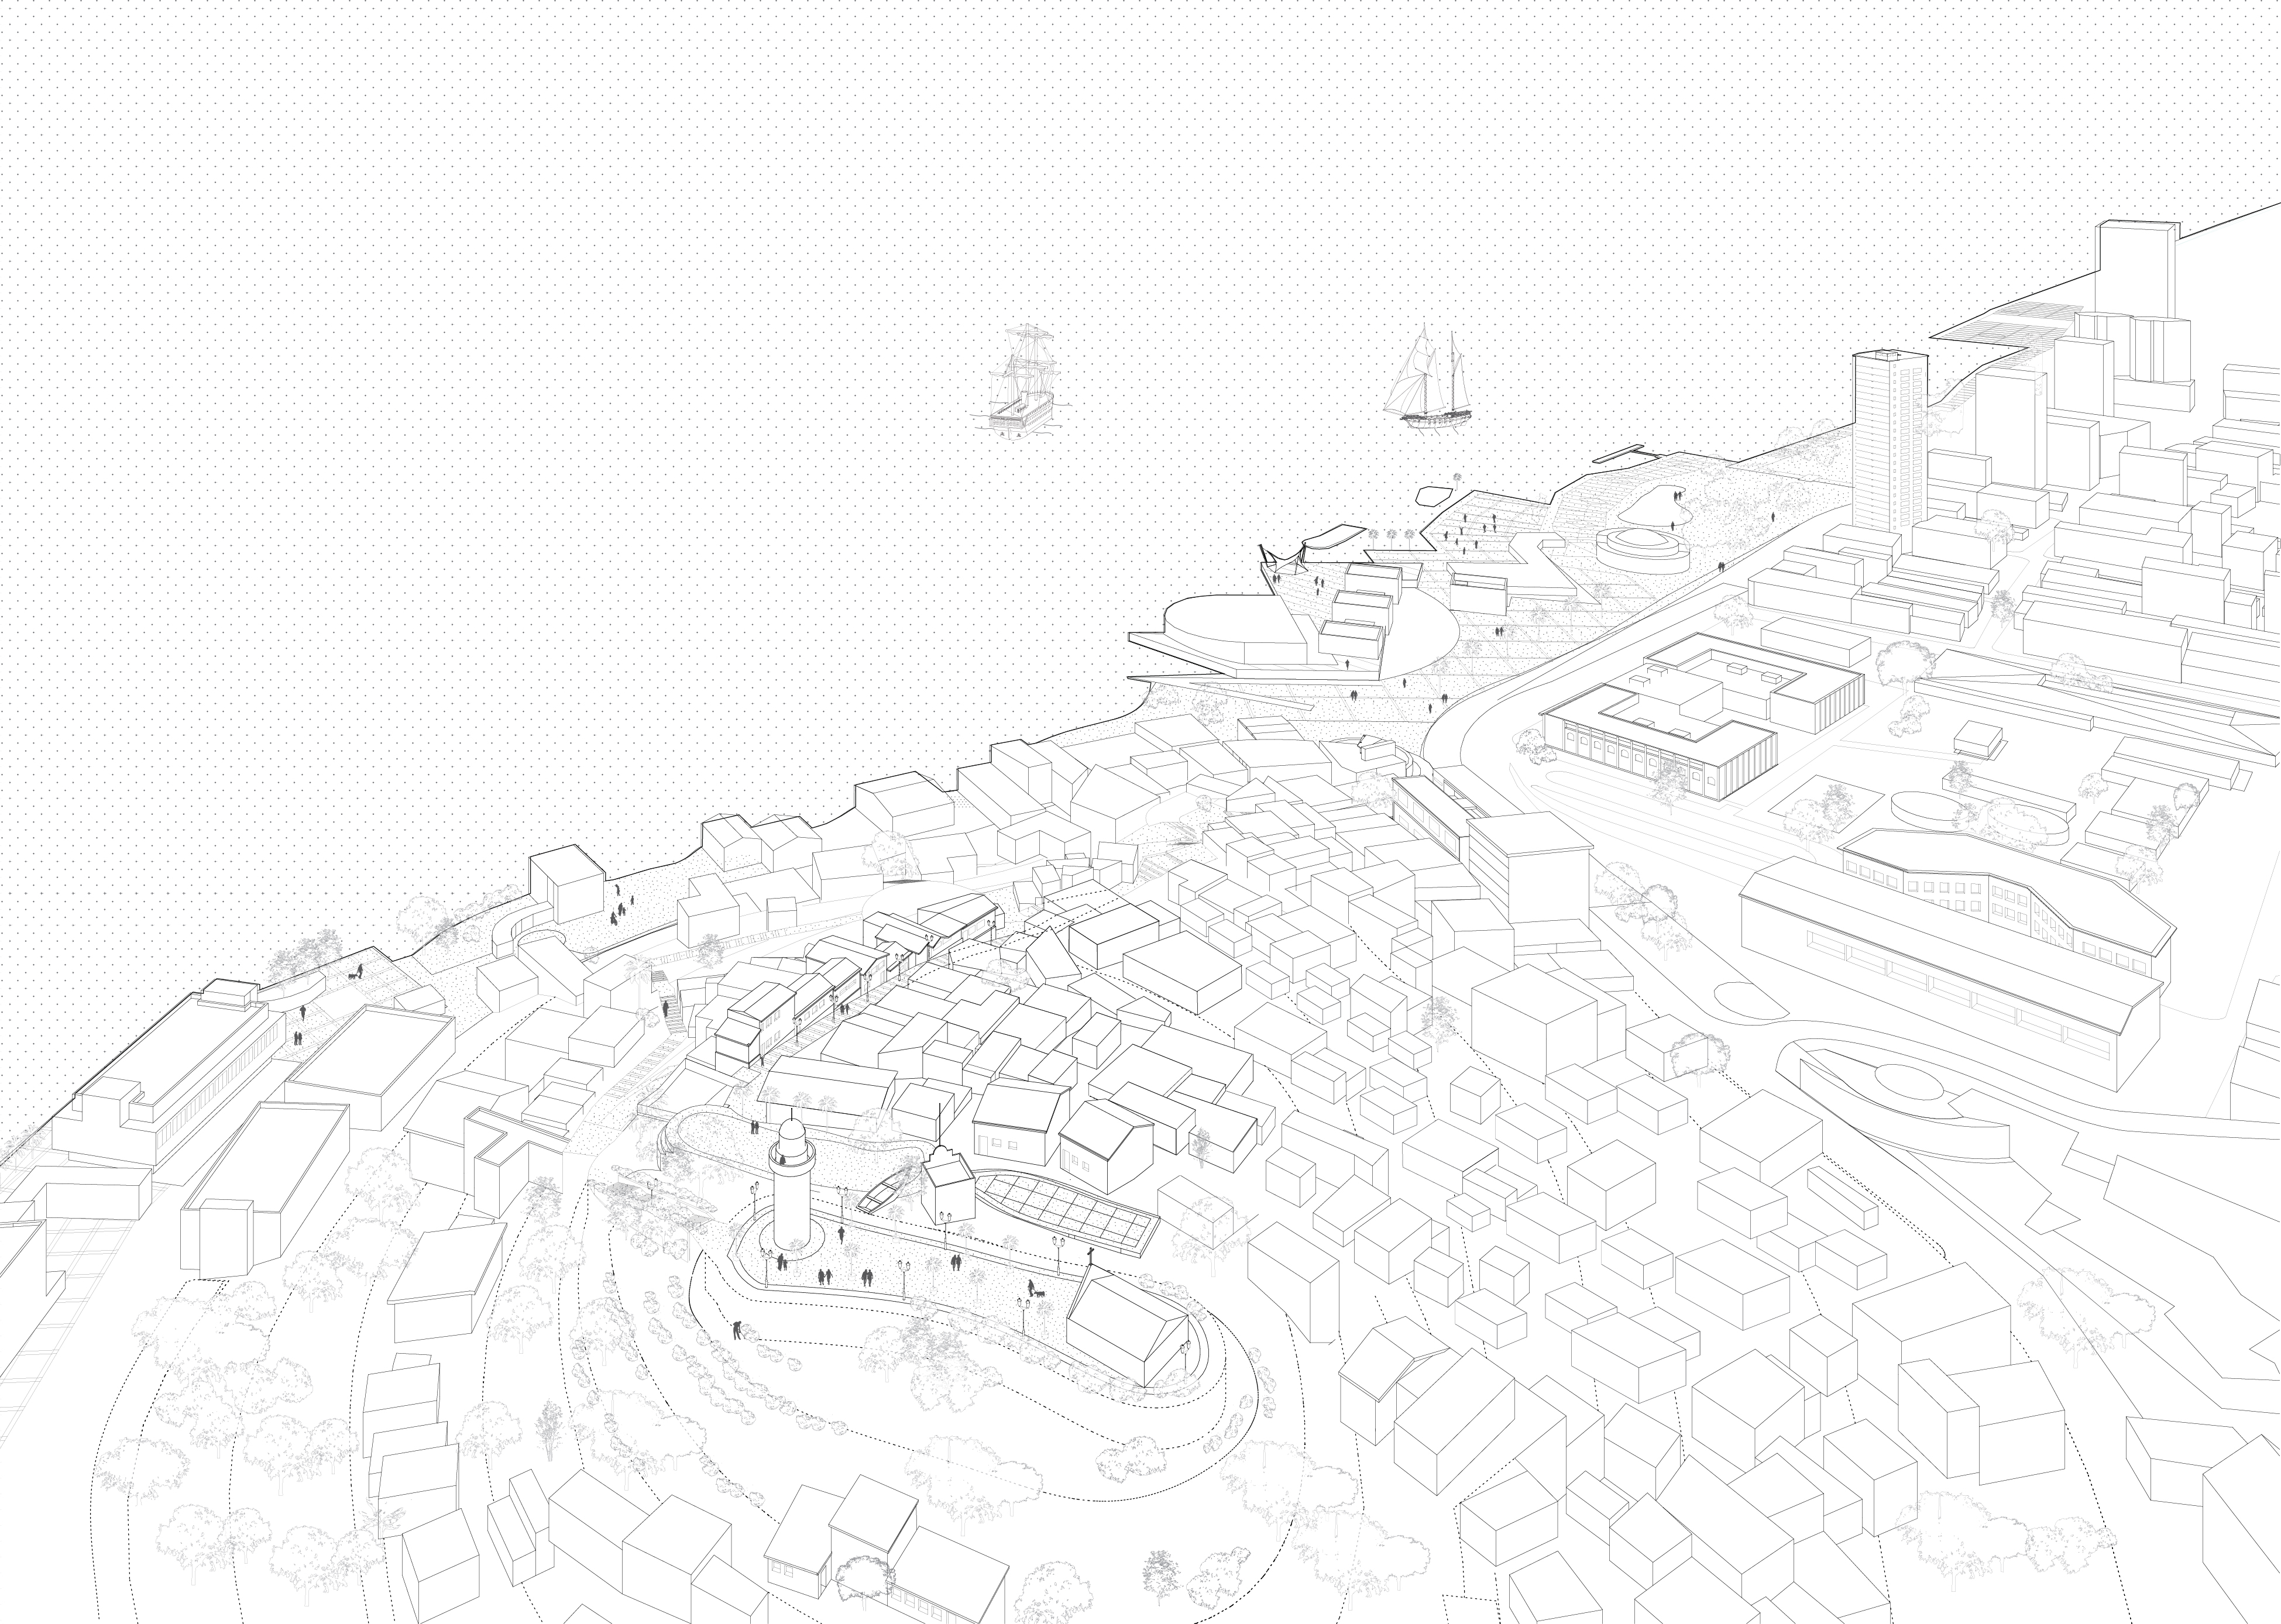 Real-ize the integrations of cities through drawing